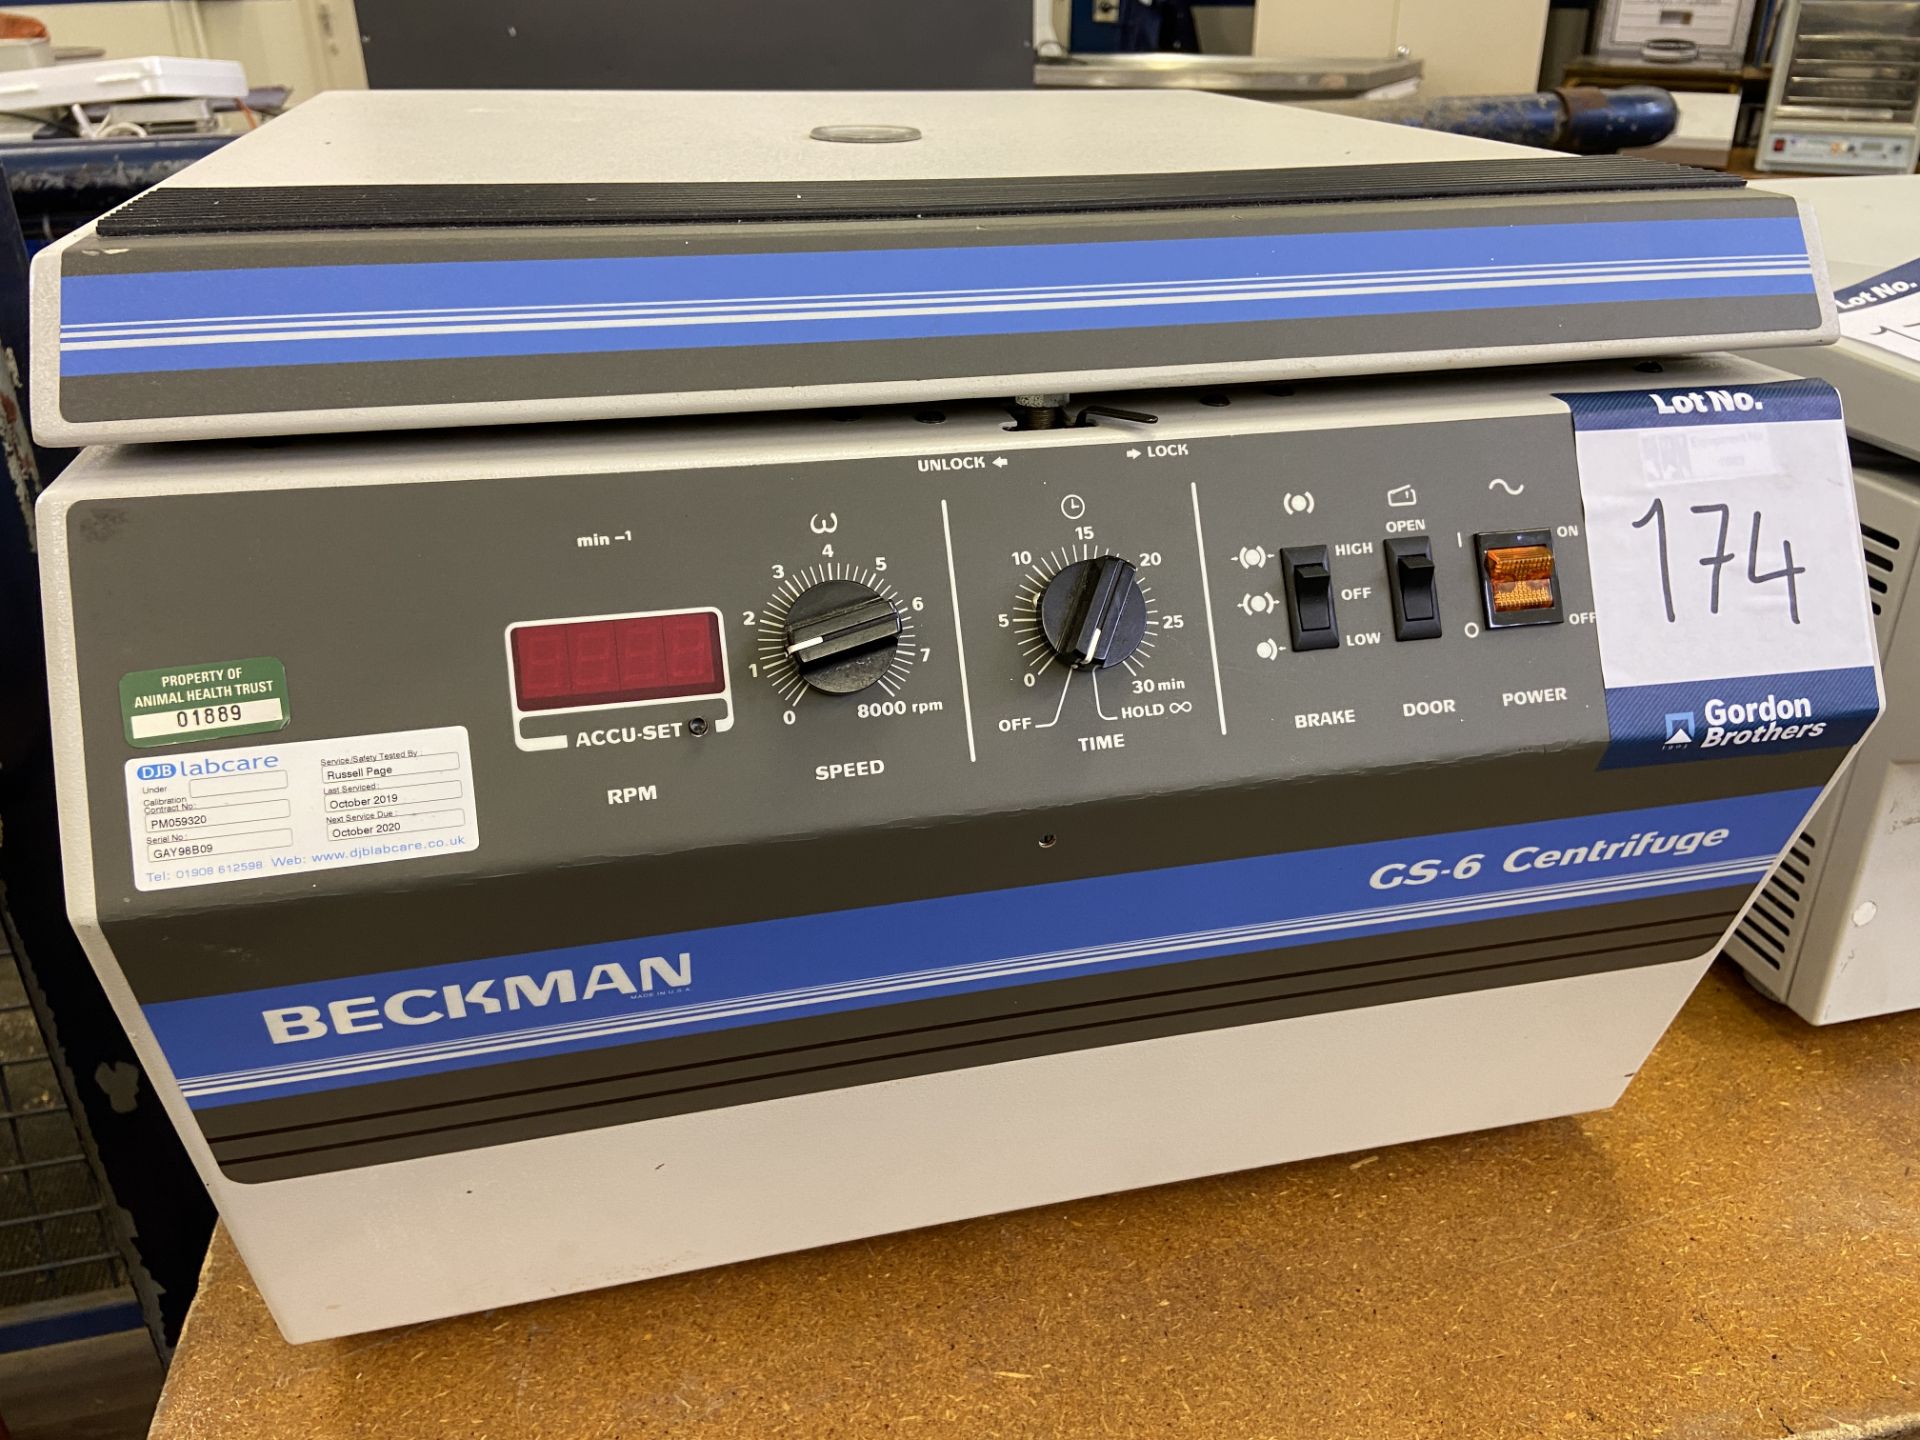 Beckman GS-6 benchtop centrifuge, Serial No. GAY98B09, with 240v power cable